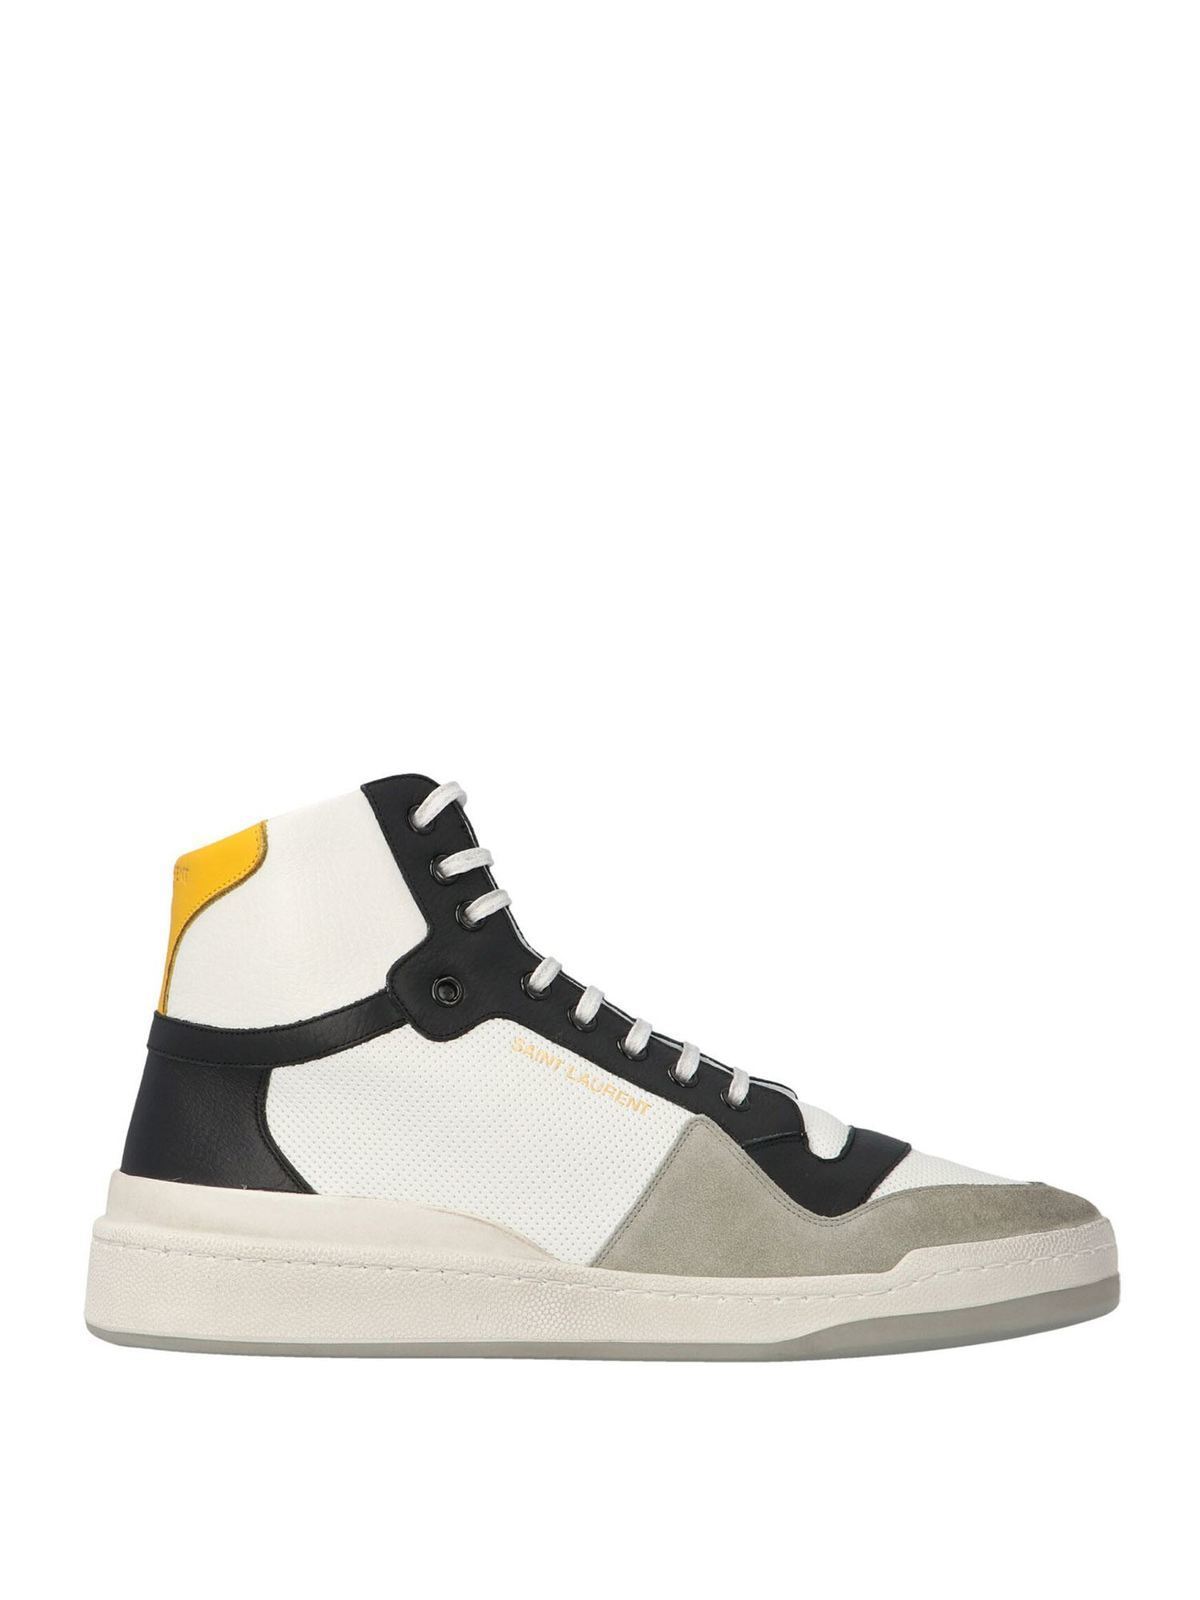 Trainers Saint Laurent - SL24 sneakers in white - 6106181JZB09664